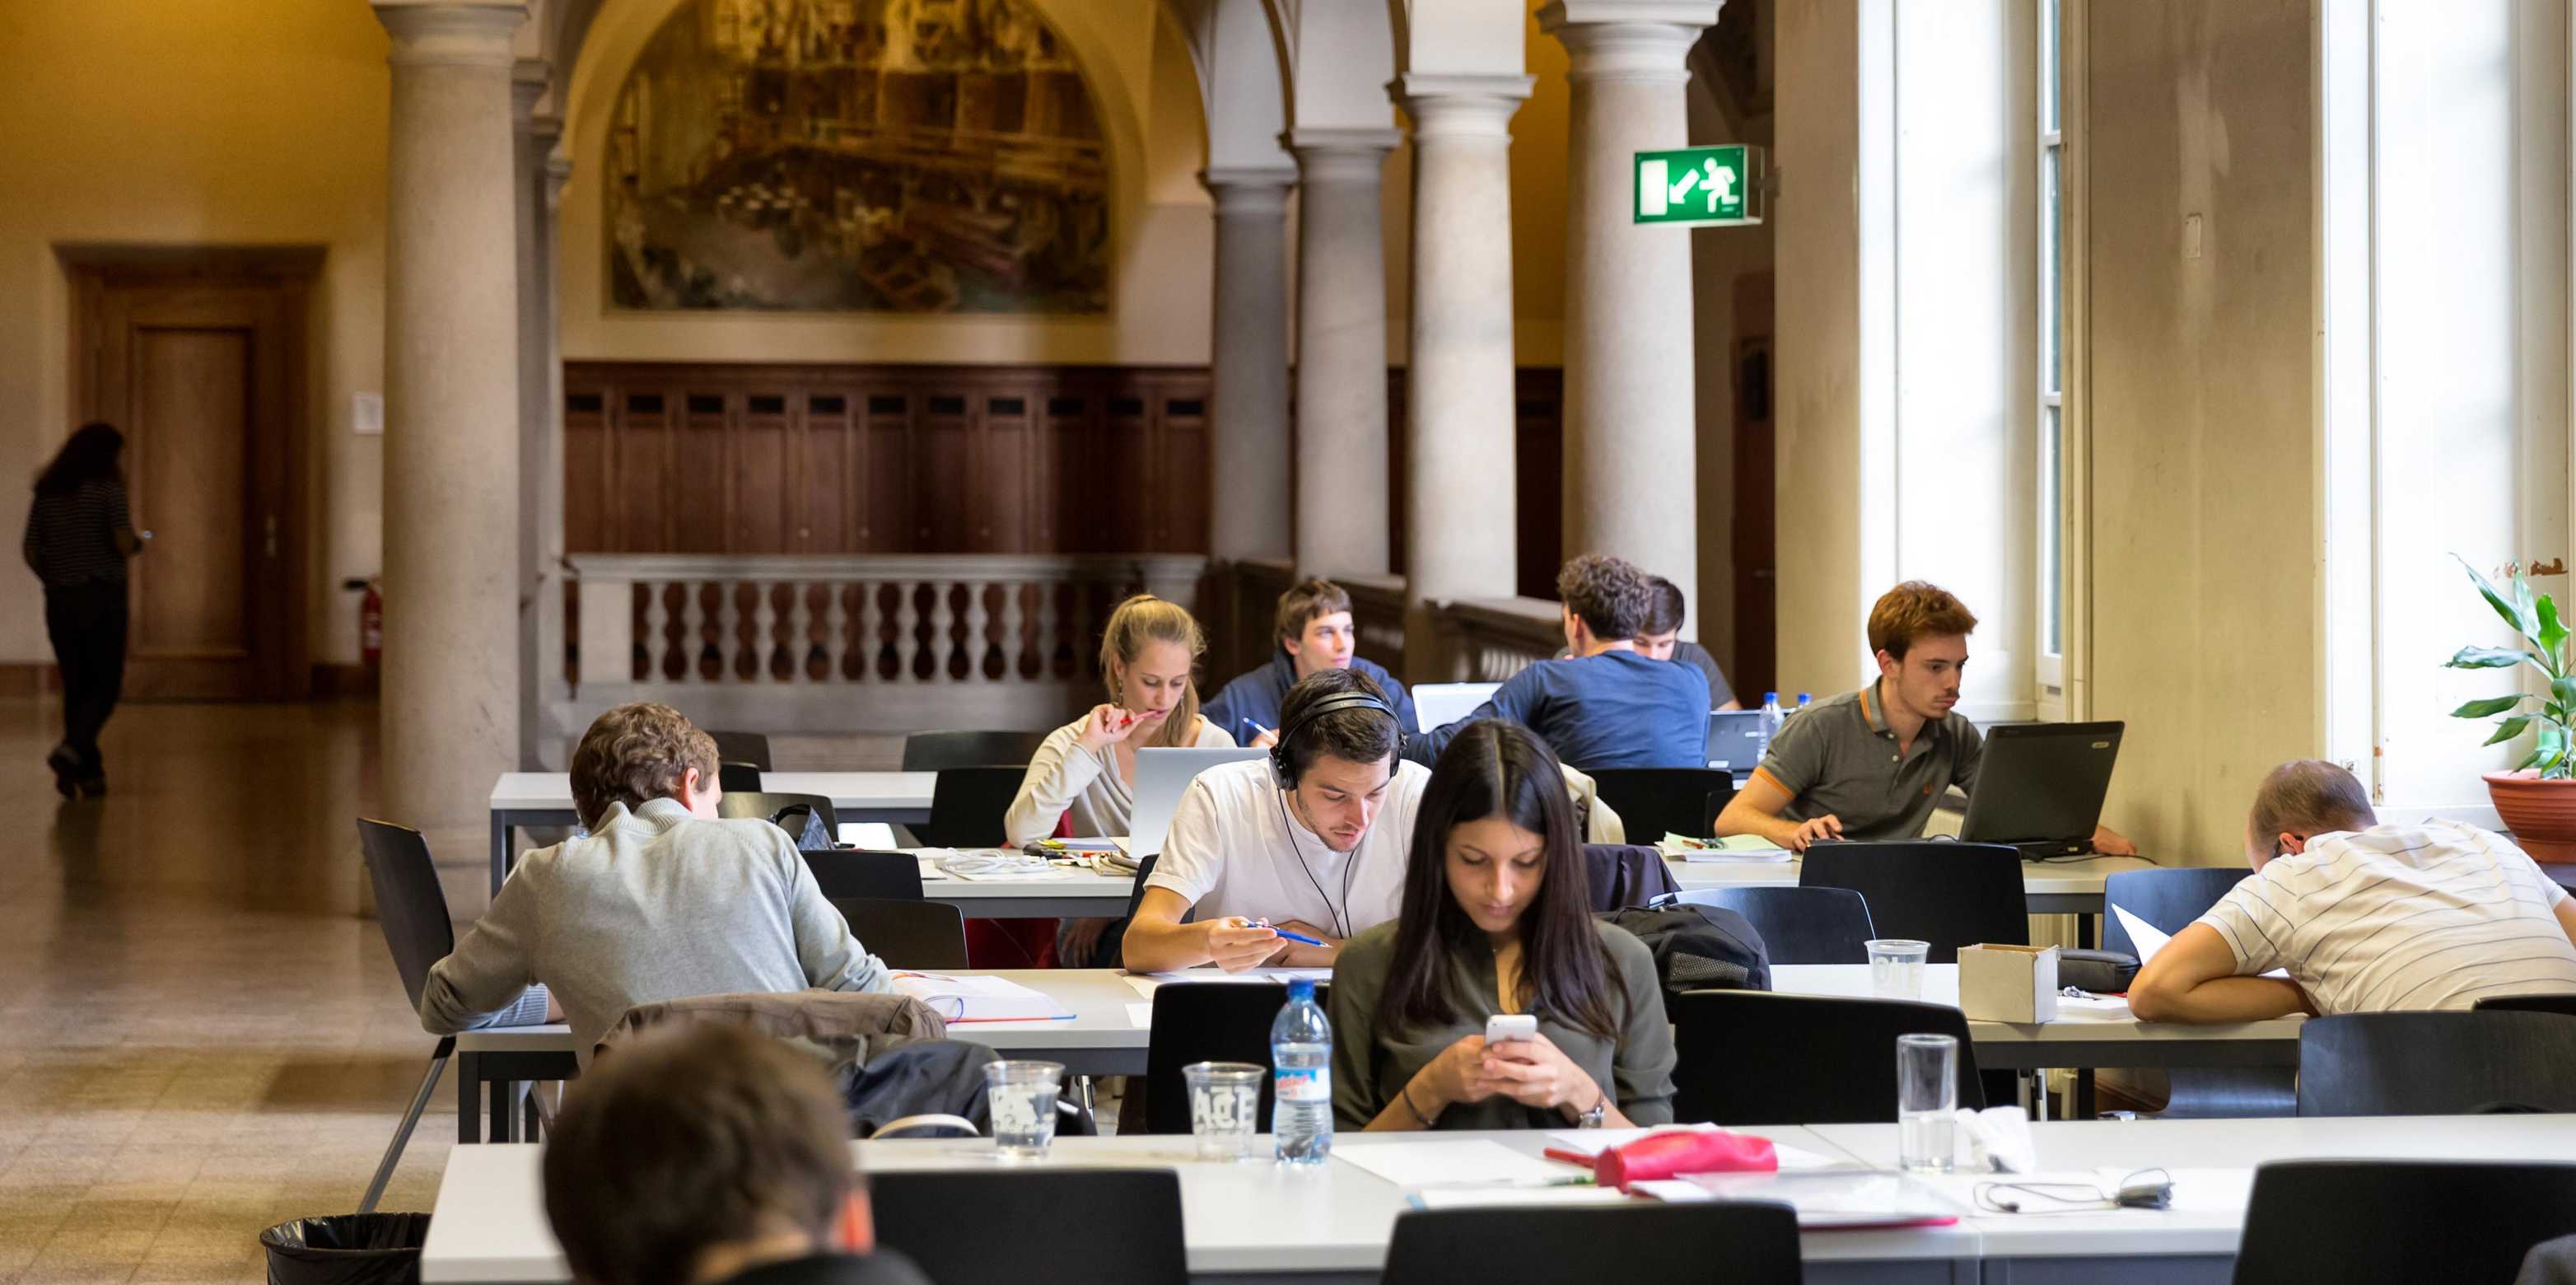 Students studying in the main building of ETH Zurich